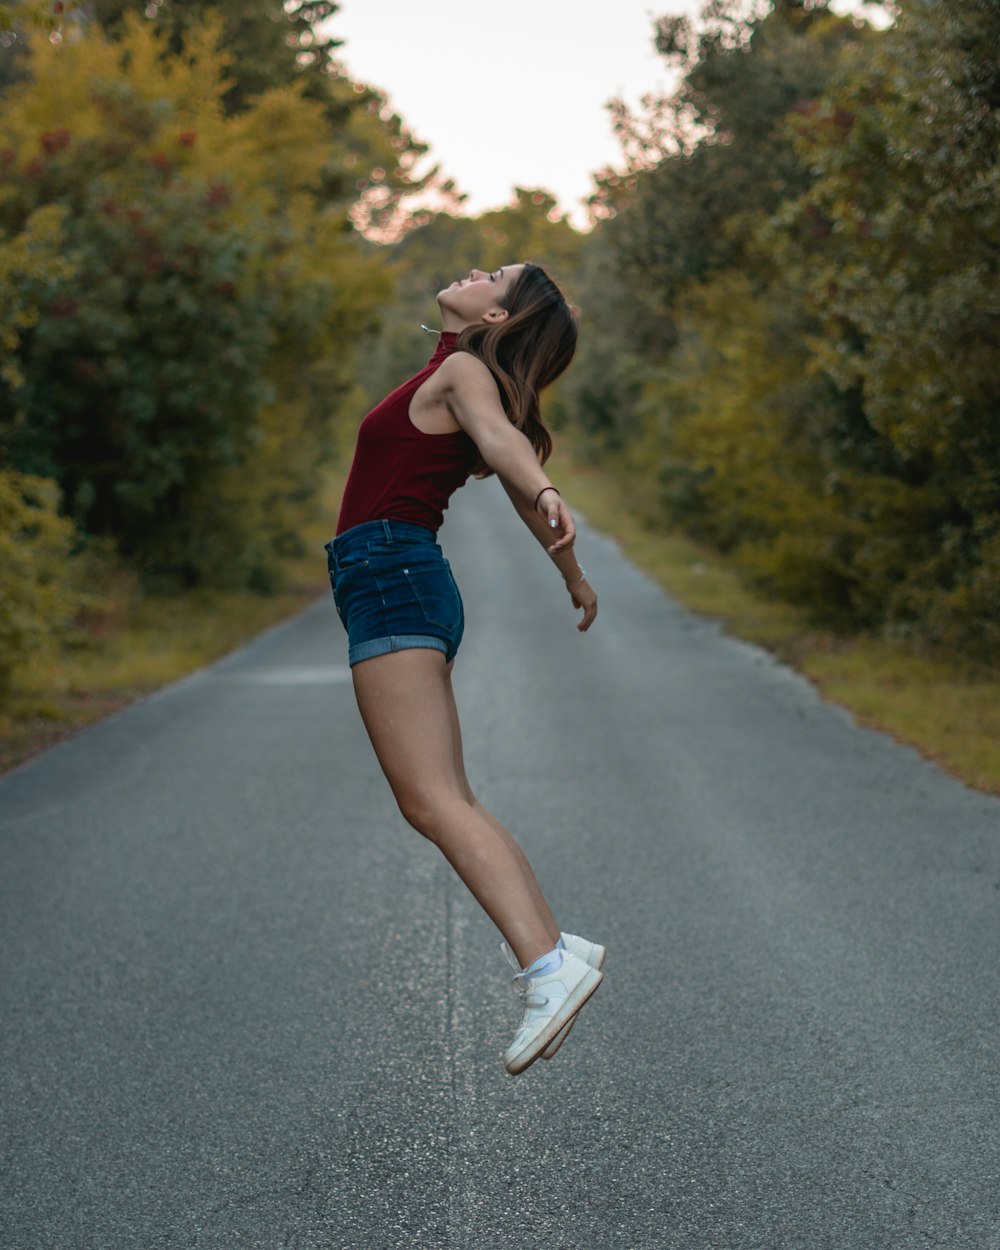 a woman jumping in the air on a road